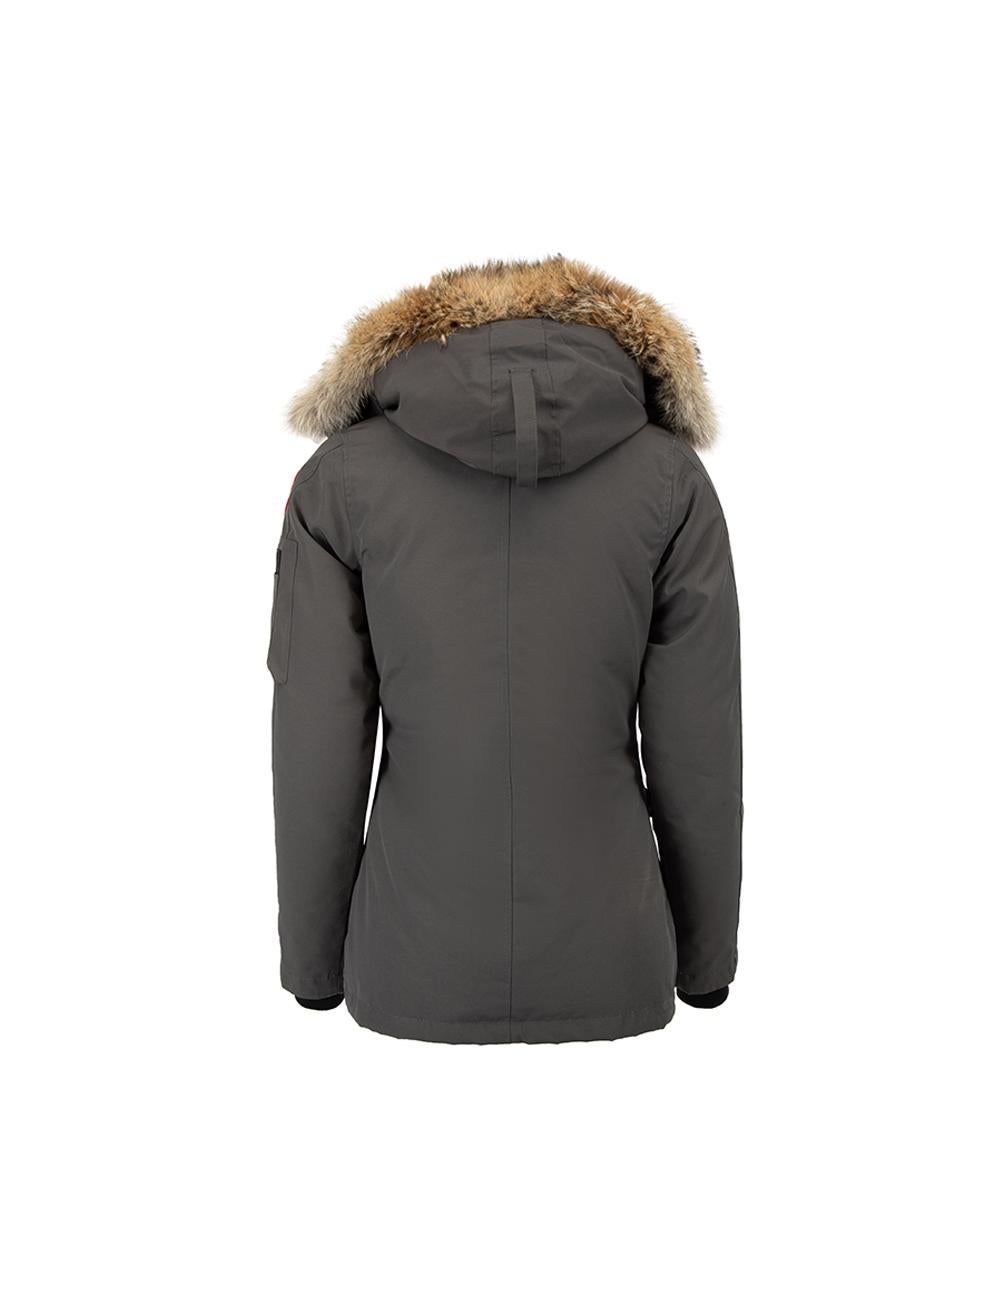 CONDITION is Very good. Minimal wear to coat is evident. Minimal wear to the outer fabric where faint marks can be seen at the shoulder. There is also some wear to the material of the pockets and the seam lines on the side of this used Canada Goose